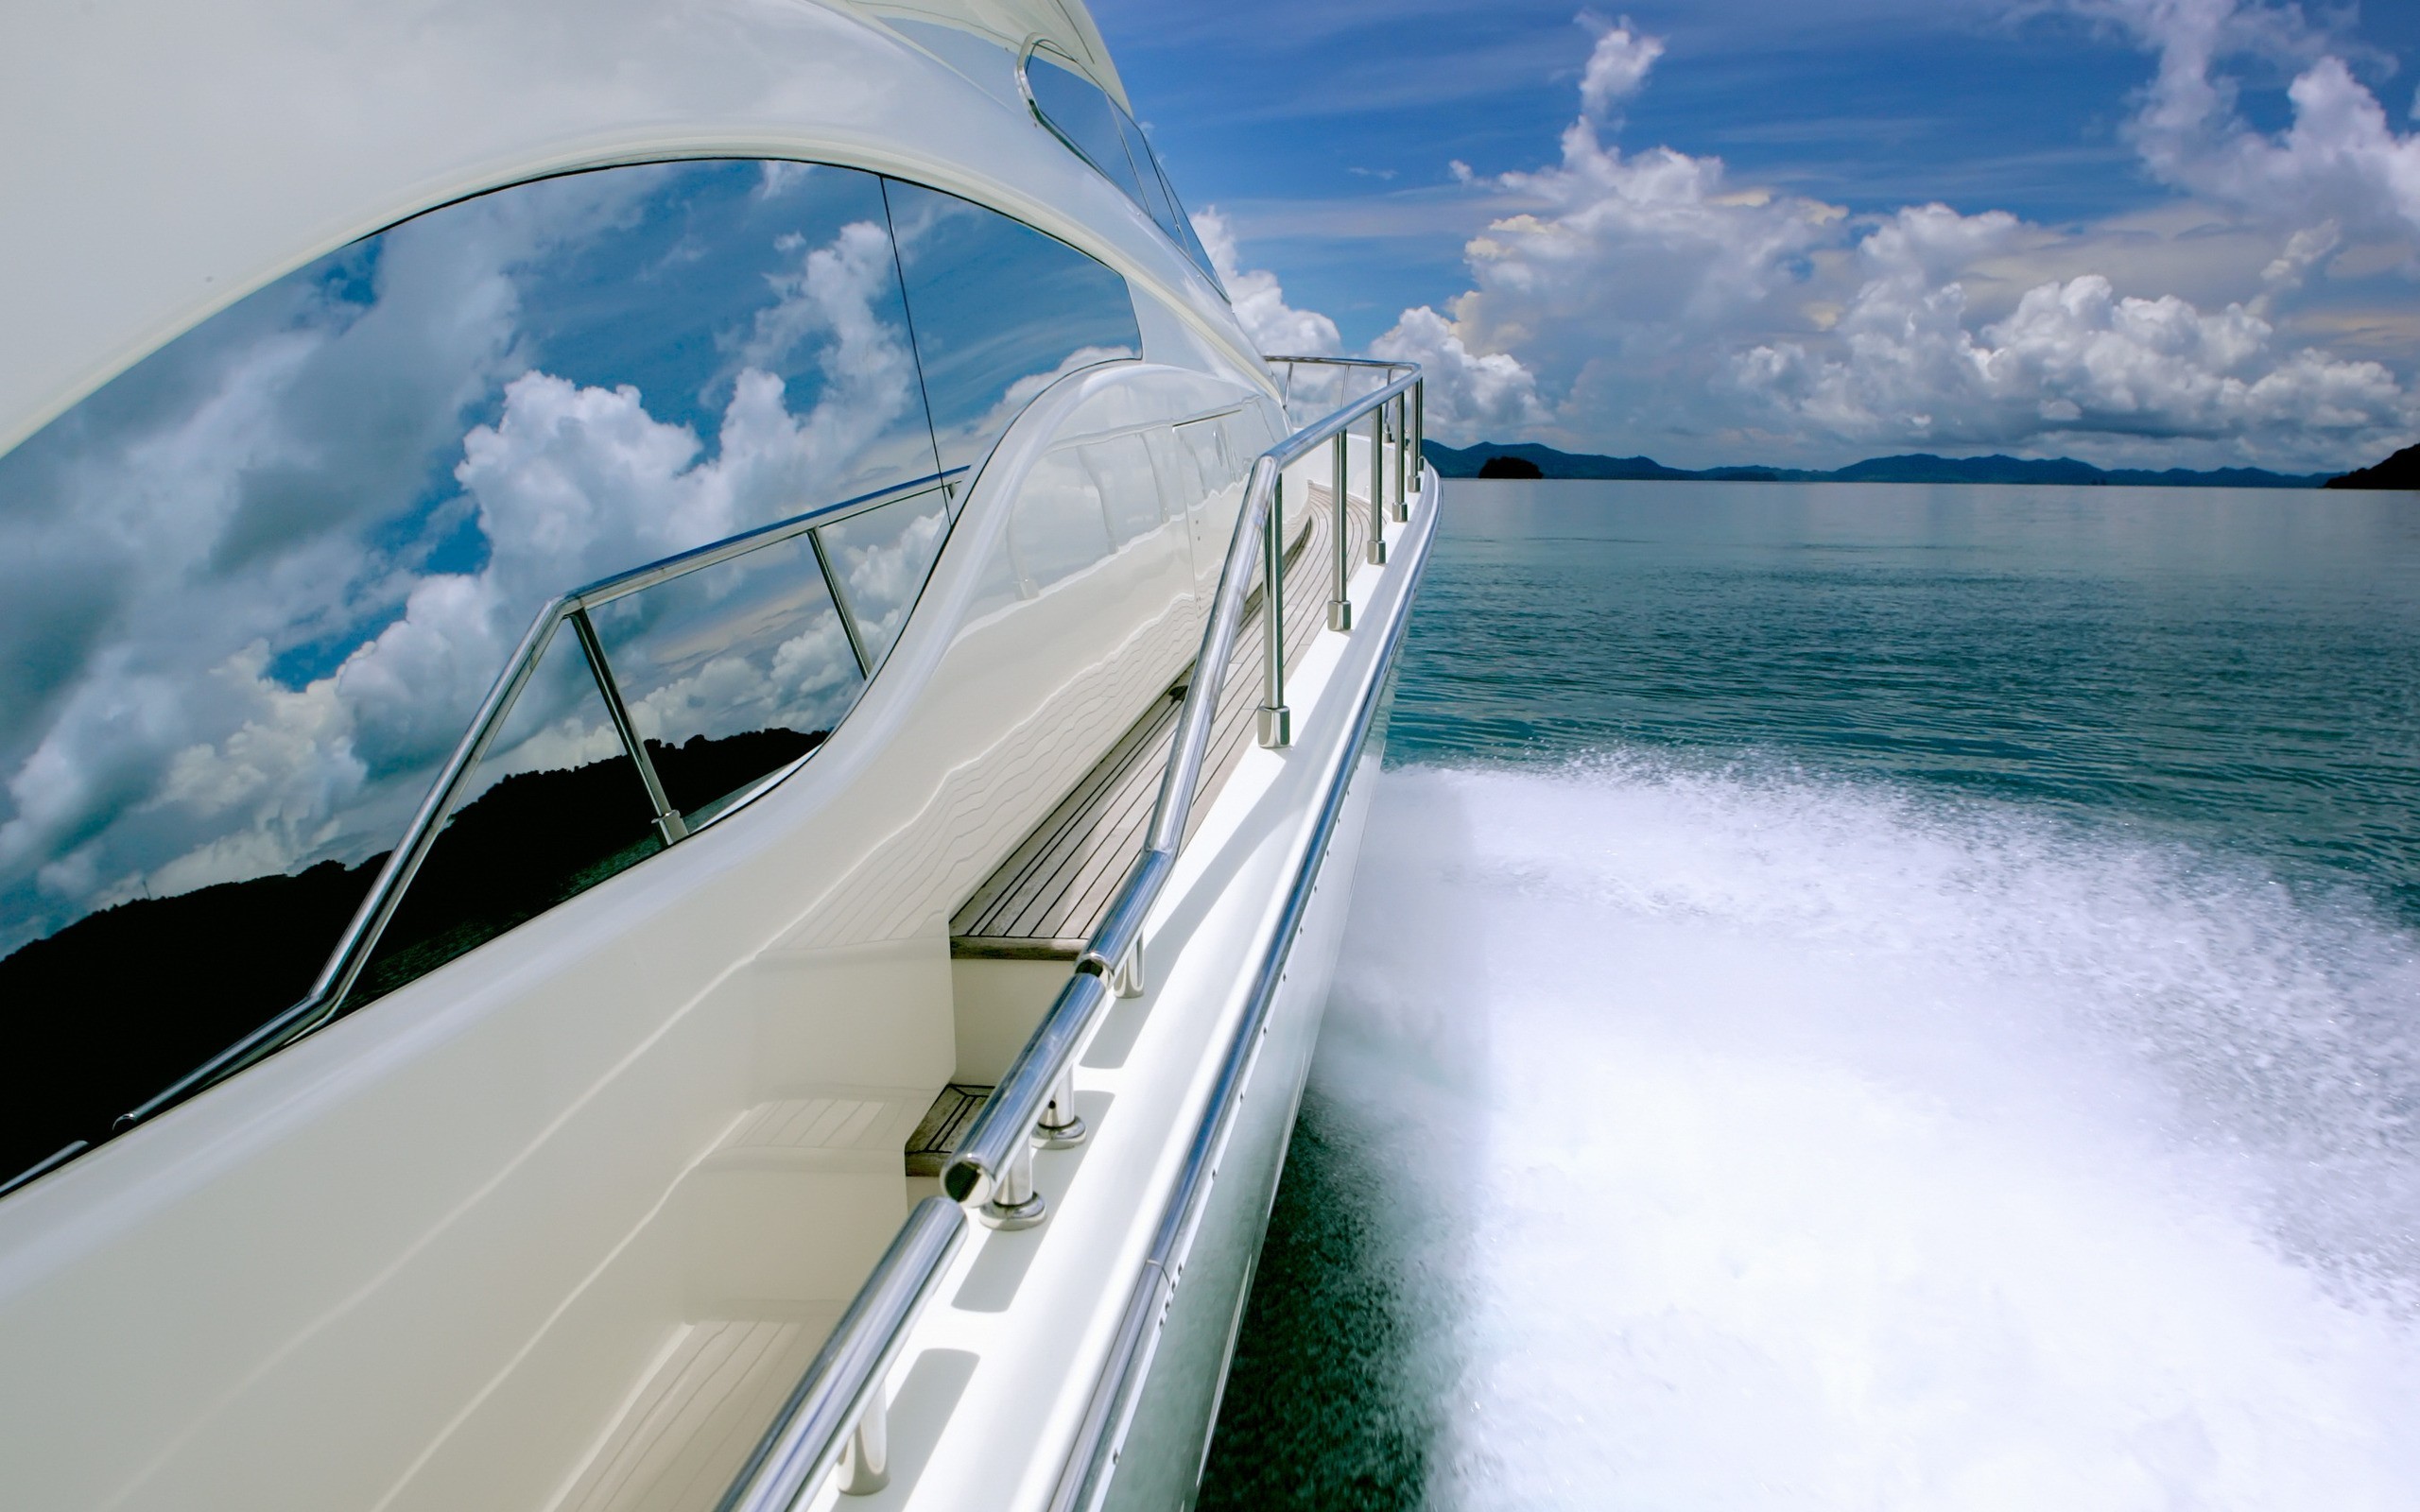 General 2560x1600 boat yacht sea clouds vehicle outdoors